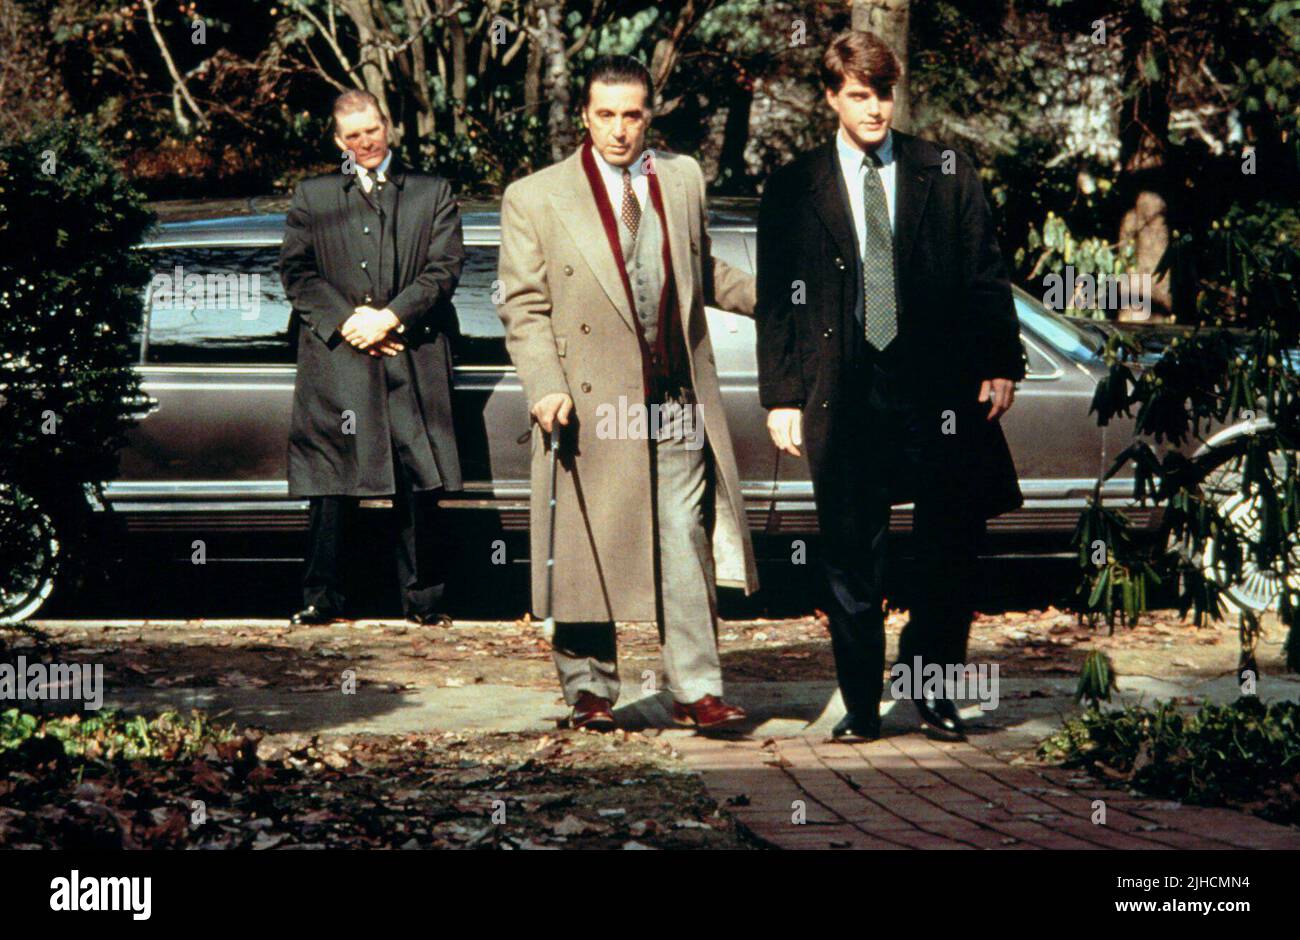 AL PACINO, CHRIS O'DONNELL, SCENT OF A WOMAN, 1992 Stock Photo